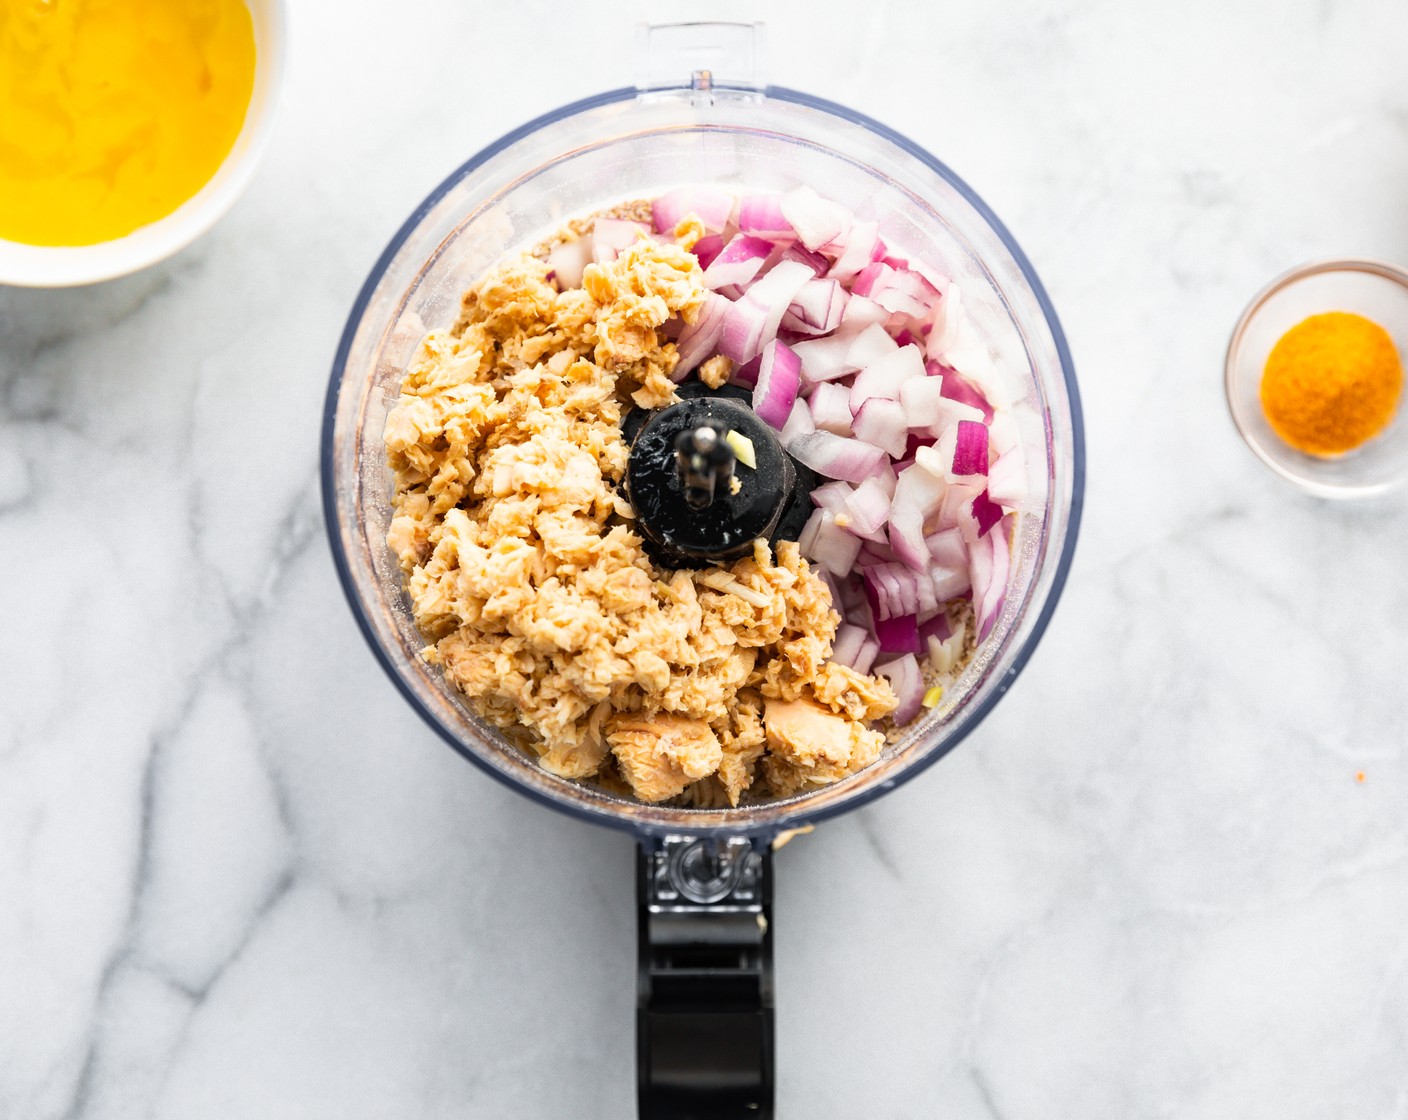 step 2 Blend Gluten-Free Rolled Oats (1 cup) in a food processor until a panko-like texture is formed. Add the Salmon (1 can), Red Onion (1/2 cup), Carrot (1/4 cup), Garlic (1 tsp) and blend until combined.